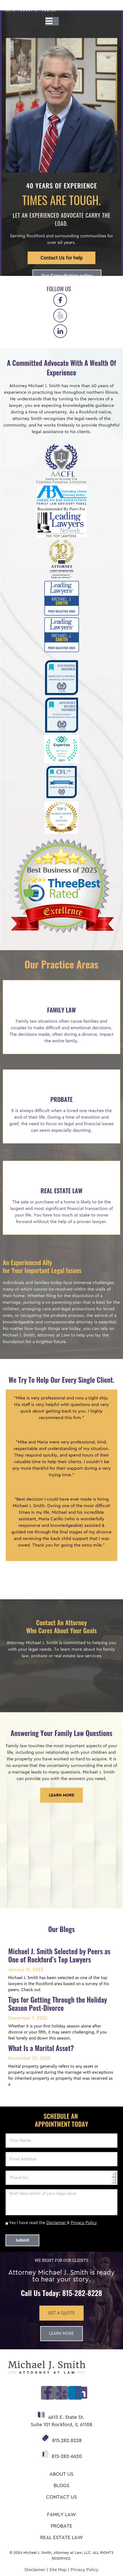 Abate & Smith - Rockford IL Lawyers